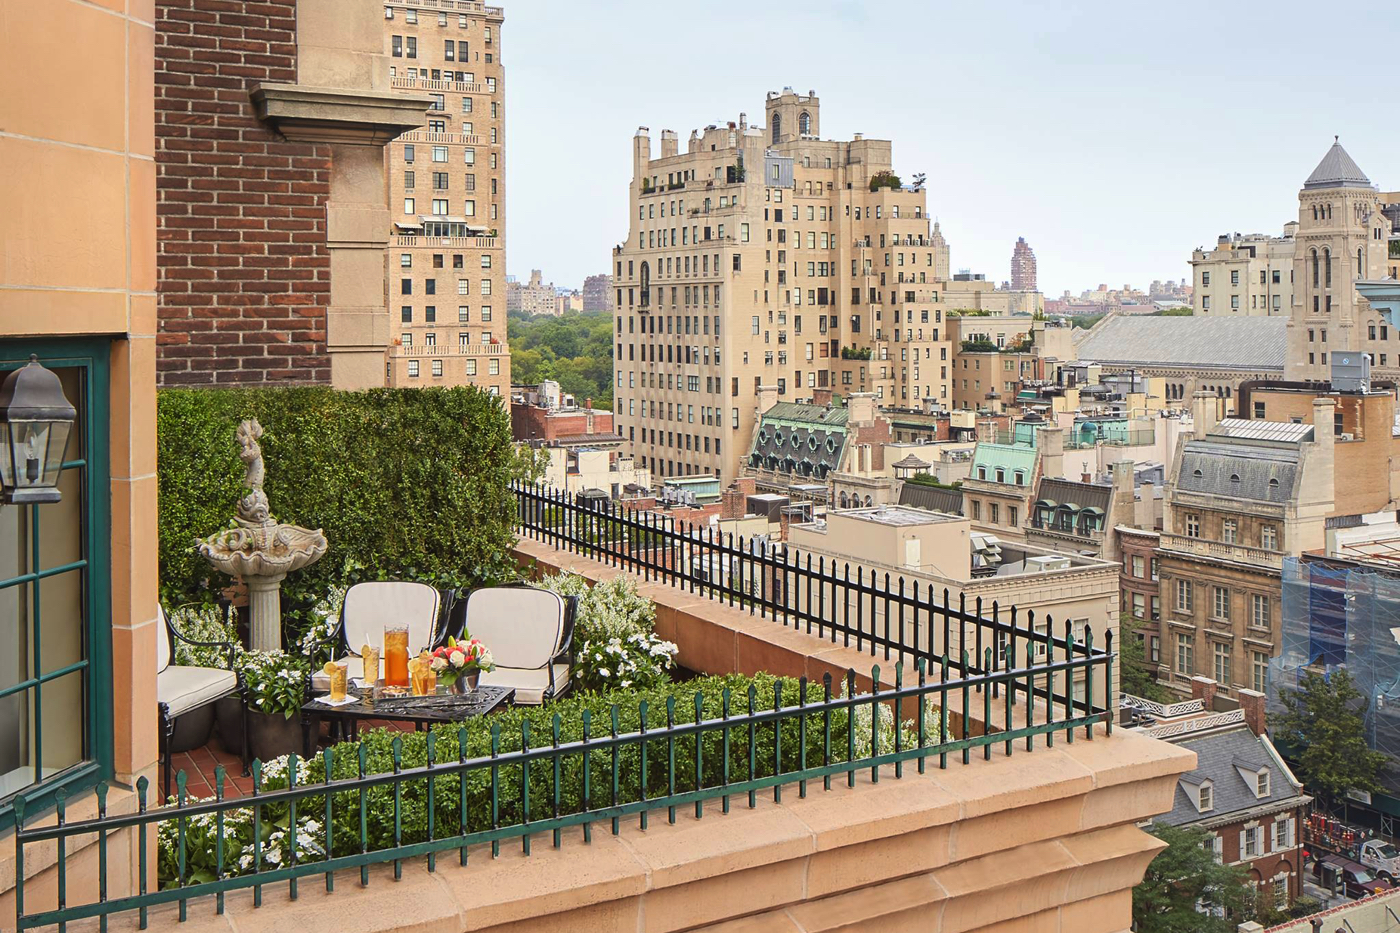 19 Seductively Romantic Hotels in NYC You’ll Love